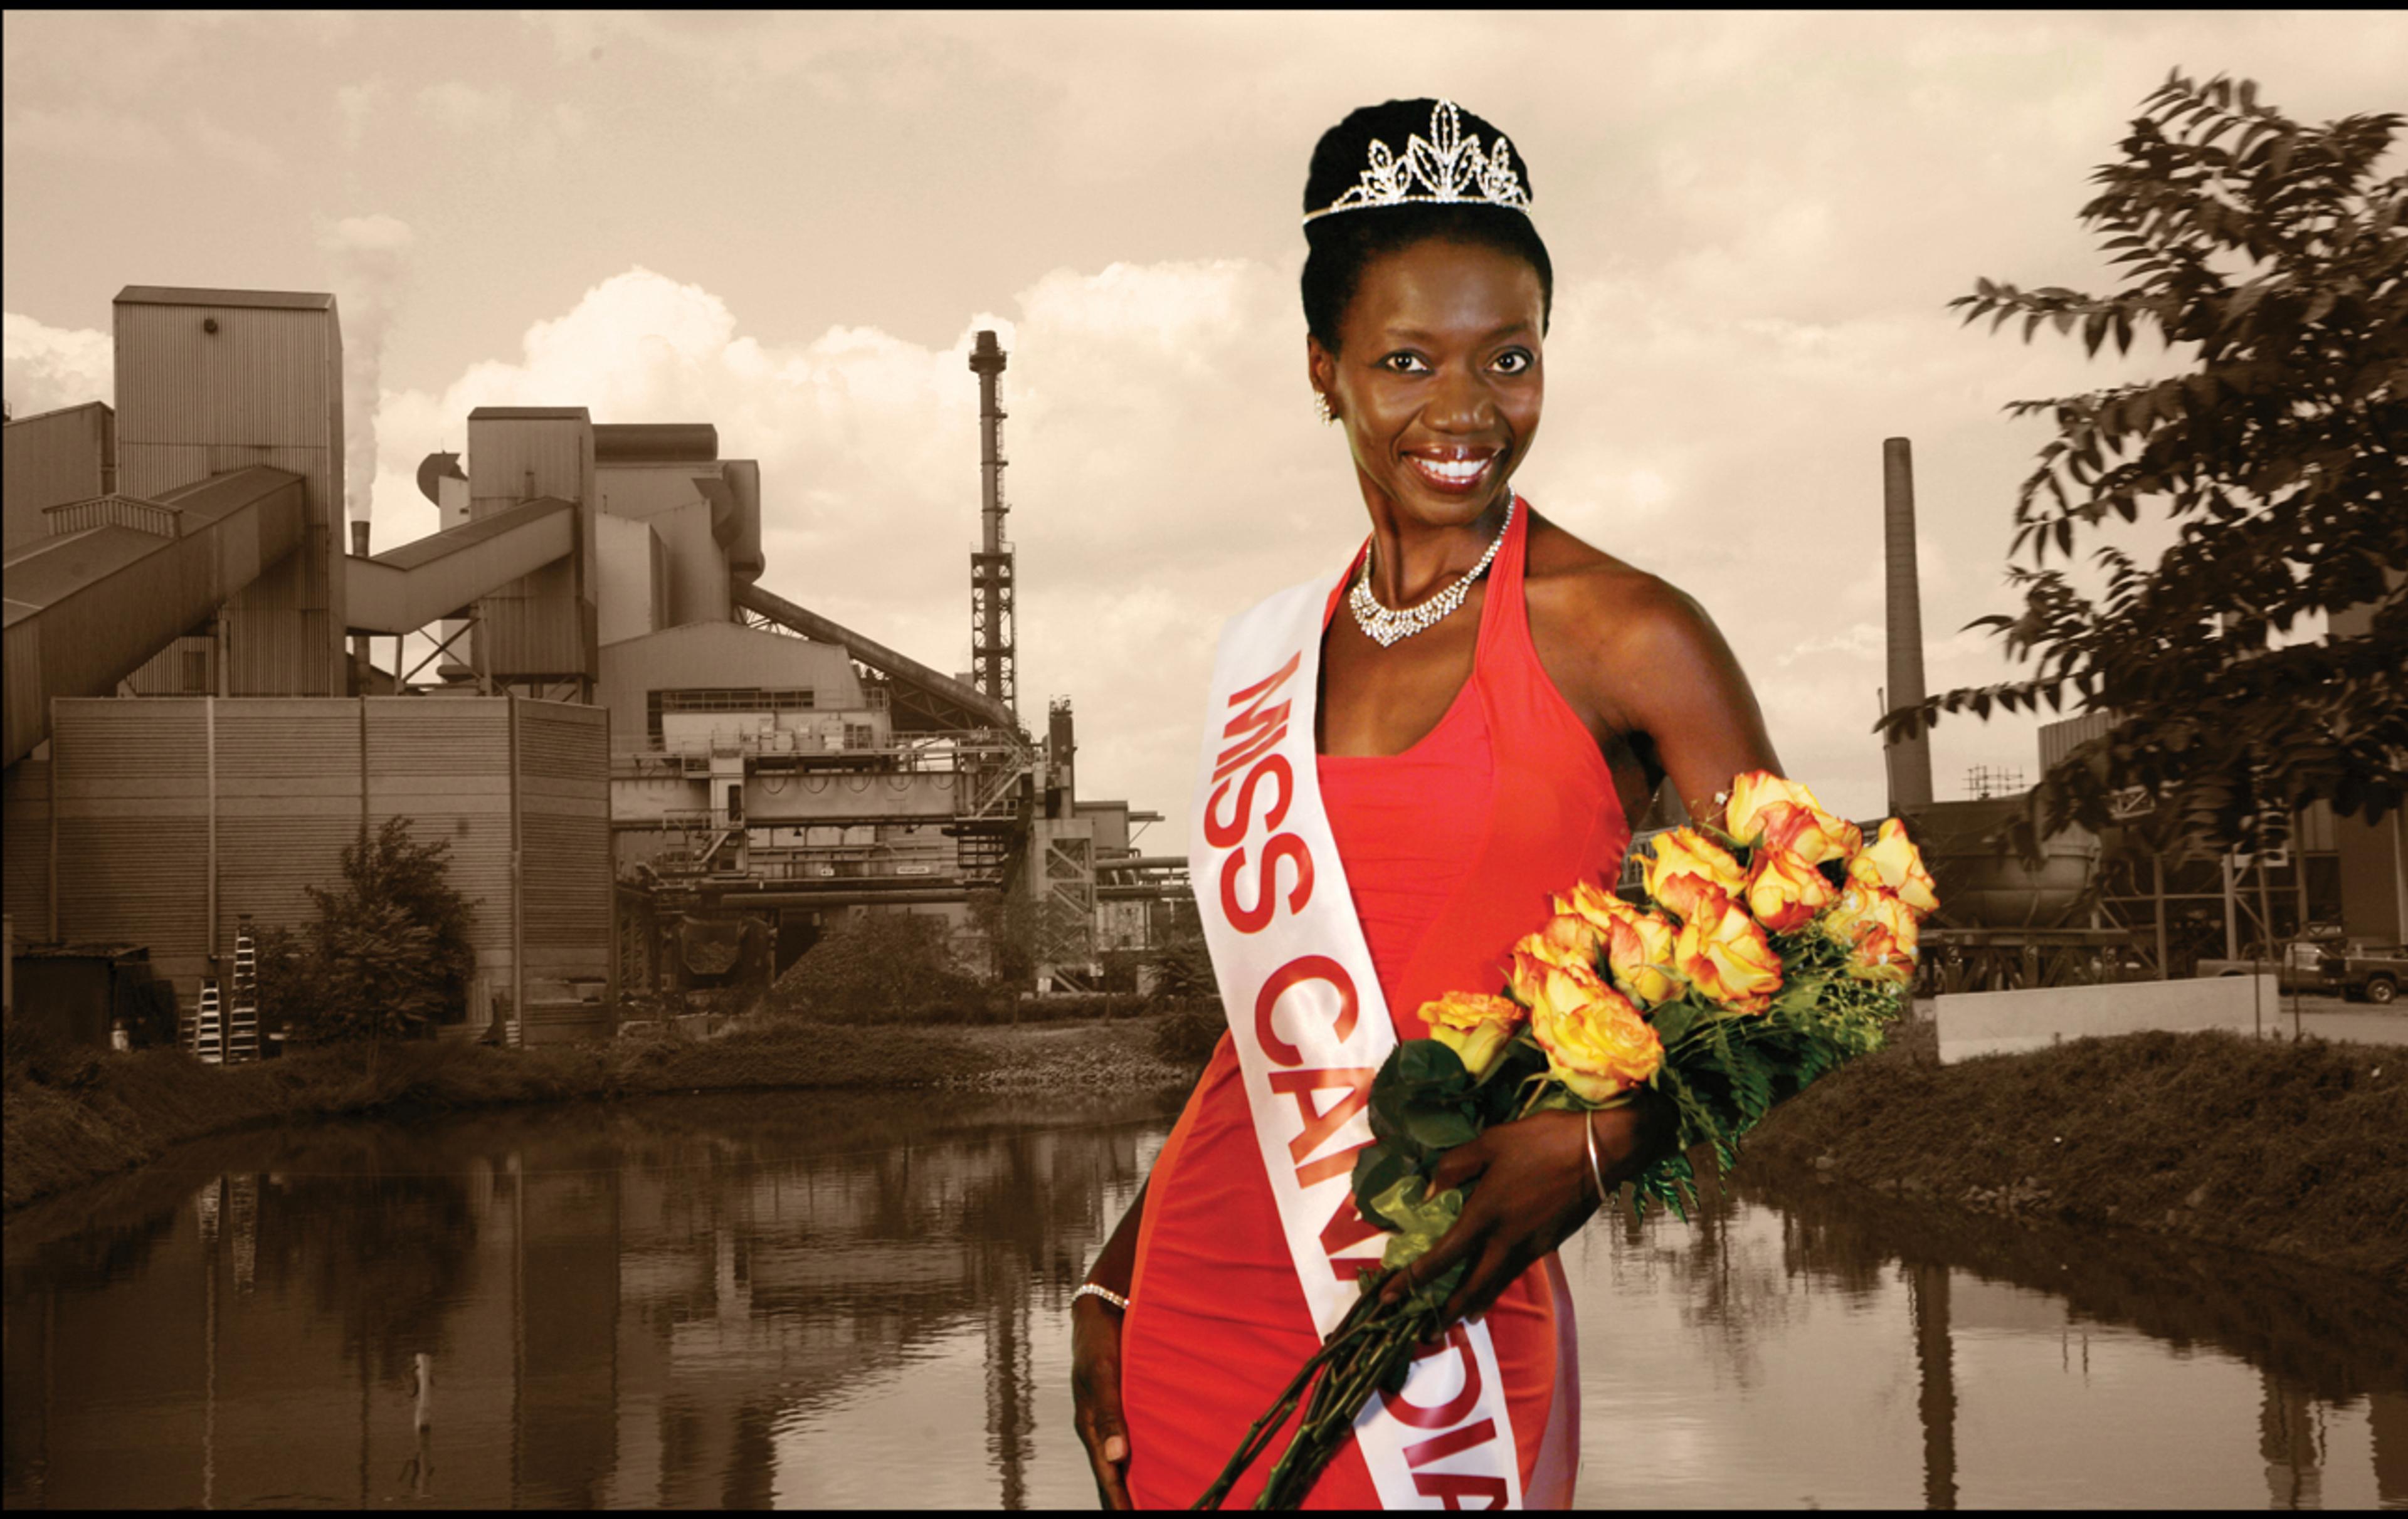 Black woman in a long red gown wears a Miss Canadiana sash against an industrial background.